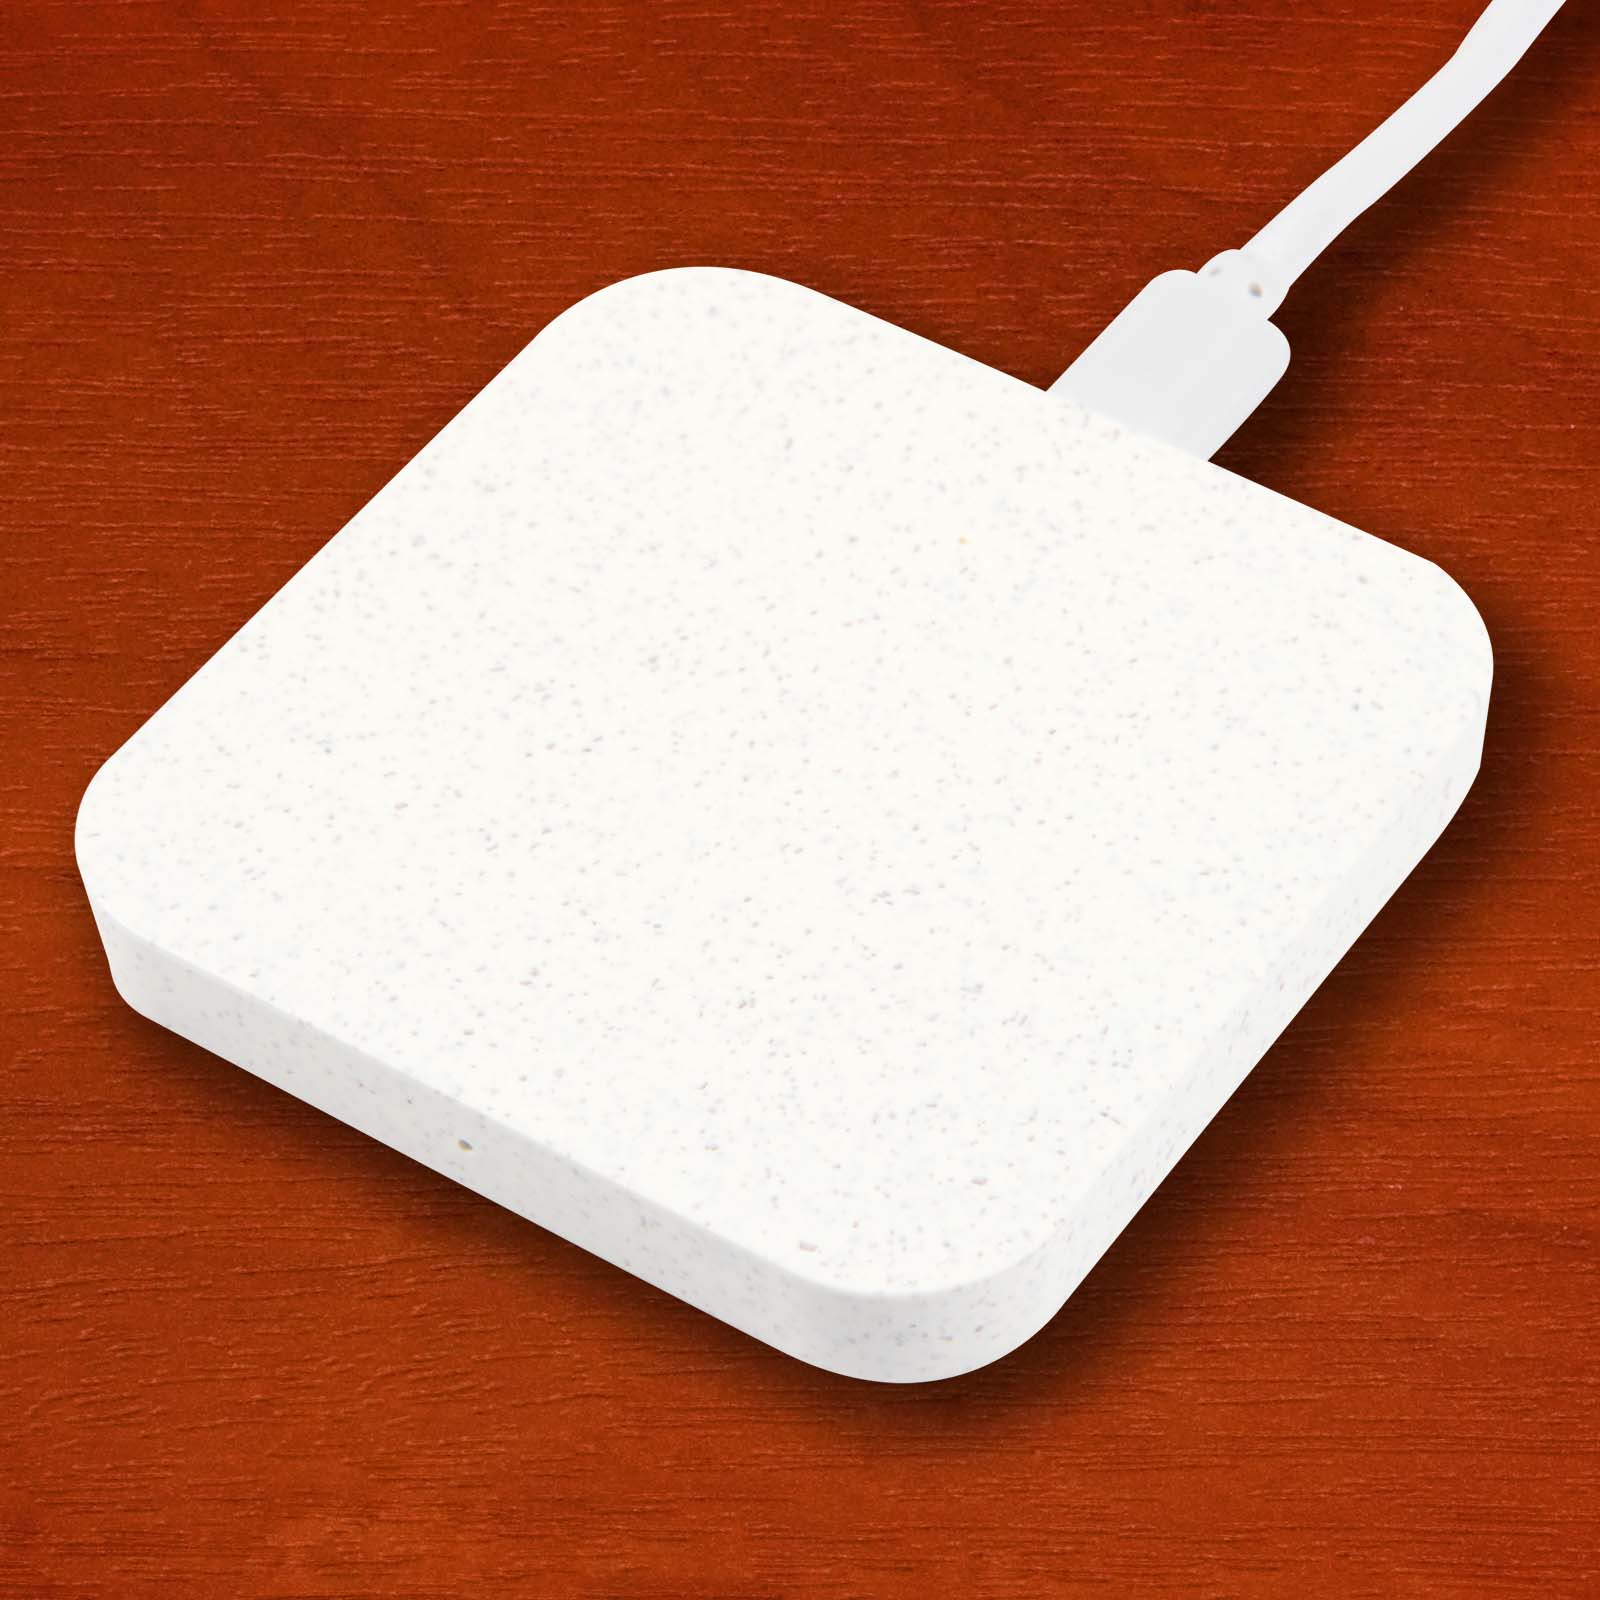 LL4 Arc Eco Square Wireless Charger Arc